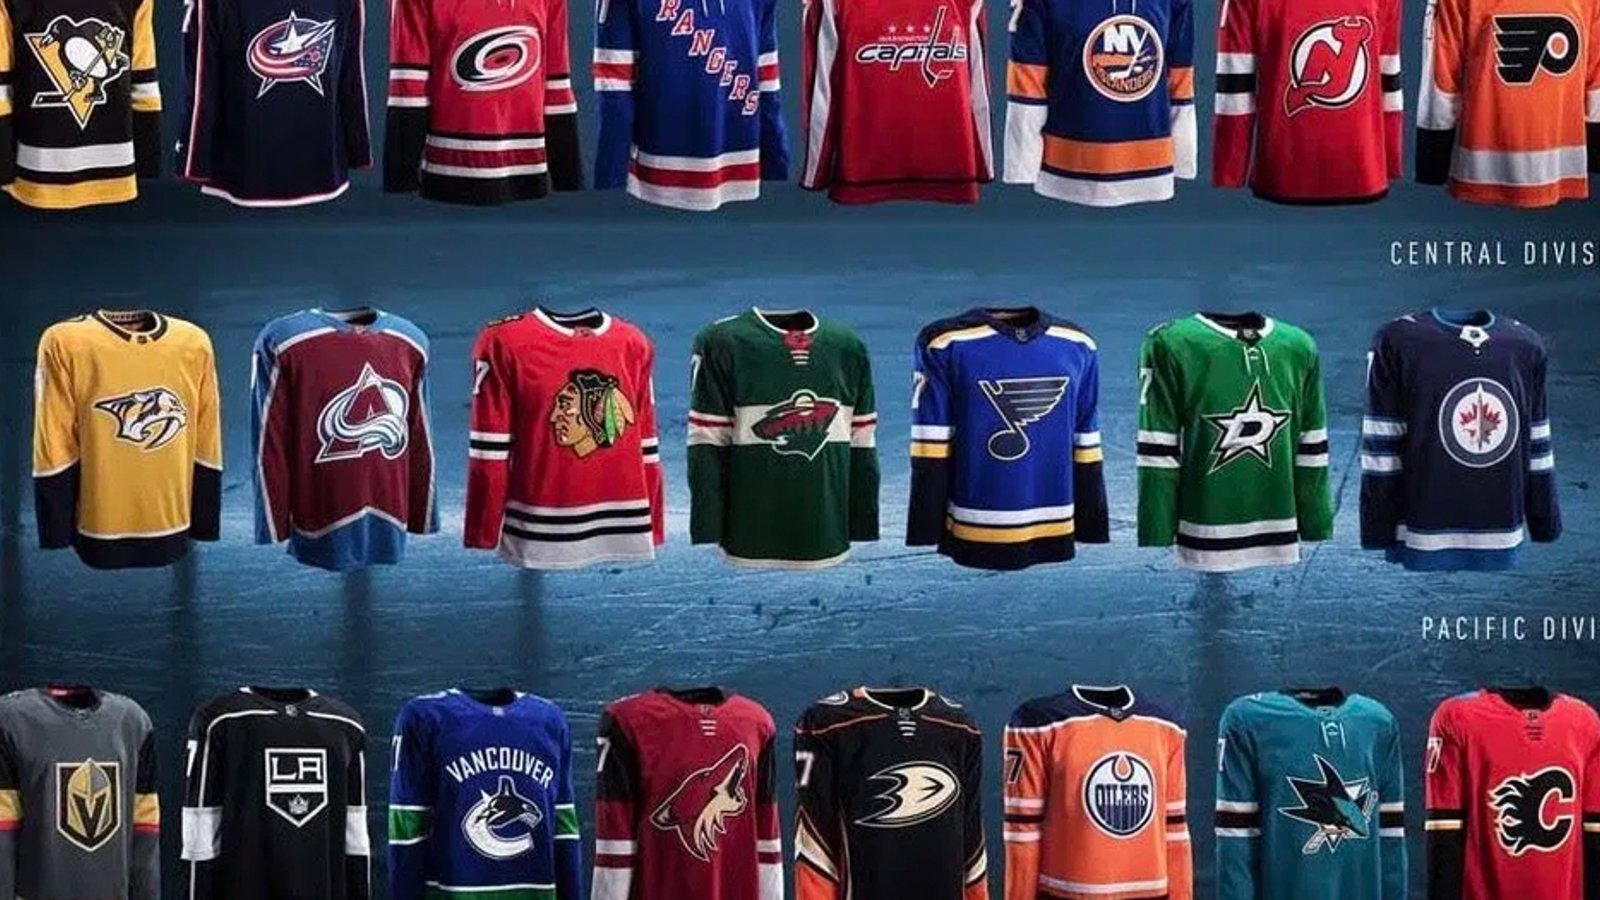 At least one NHL team is completely revamping their uniforms for 2020-21